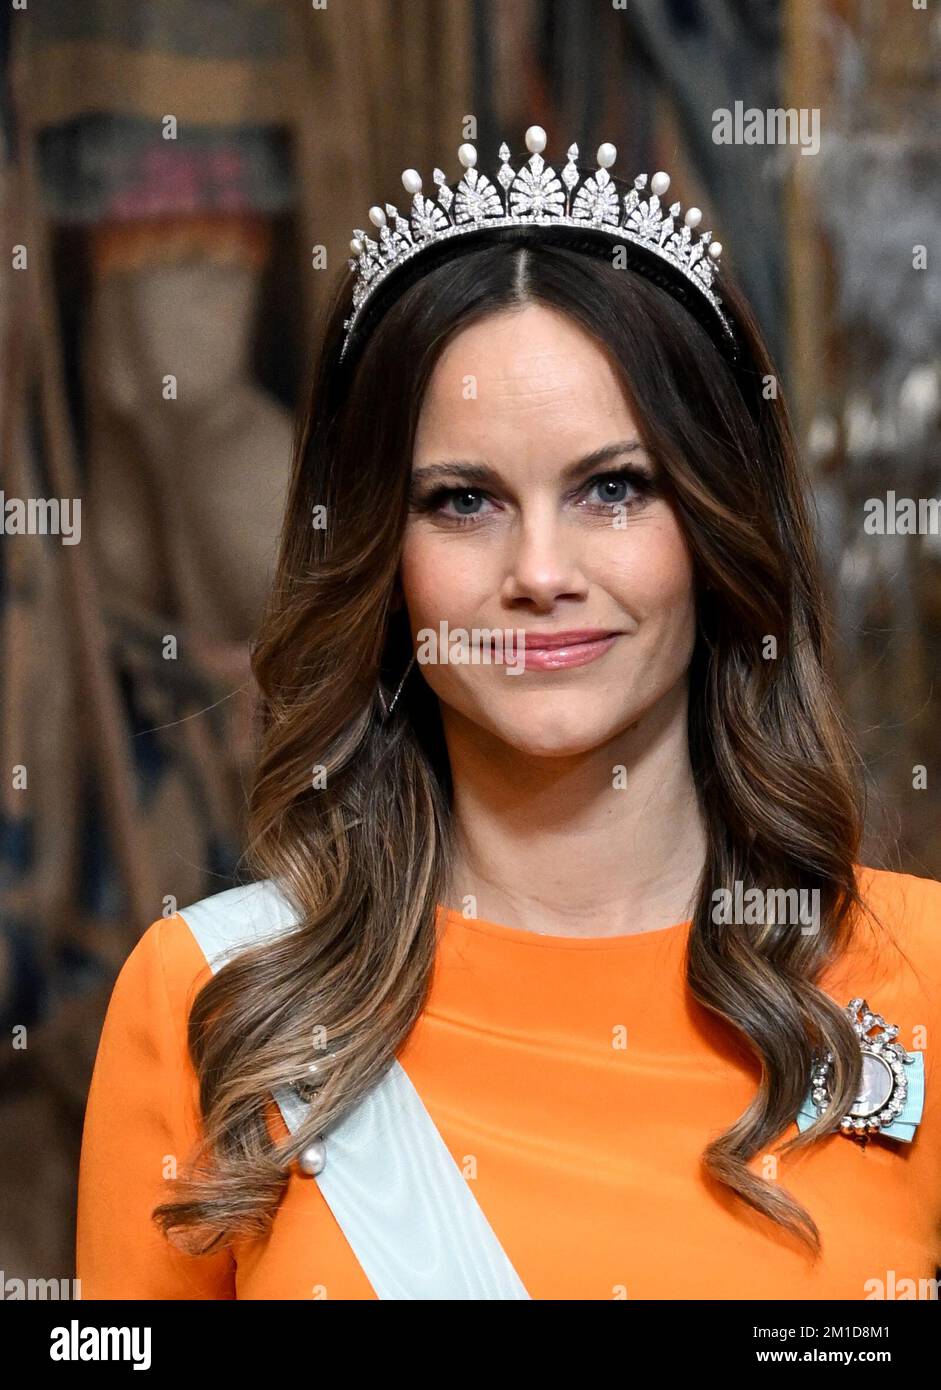 Princess Sofia attends the King's dinner for the Nobel laureates at the Royal Palace in Stockholm, Sweden, 11 December 2022. Photo: Pontus Lundahl / TT / 10050 Stock Photo